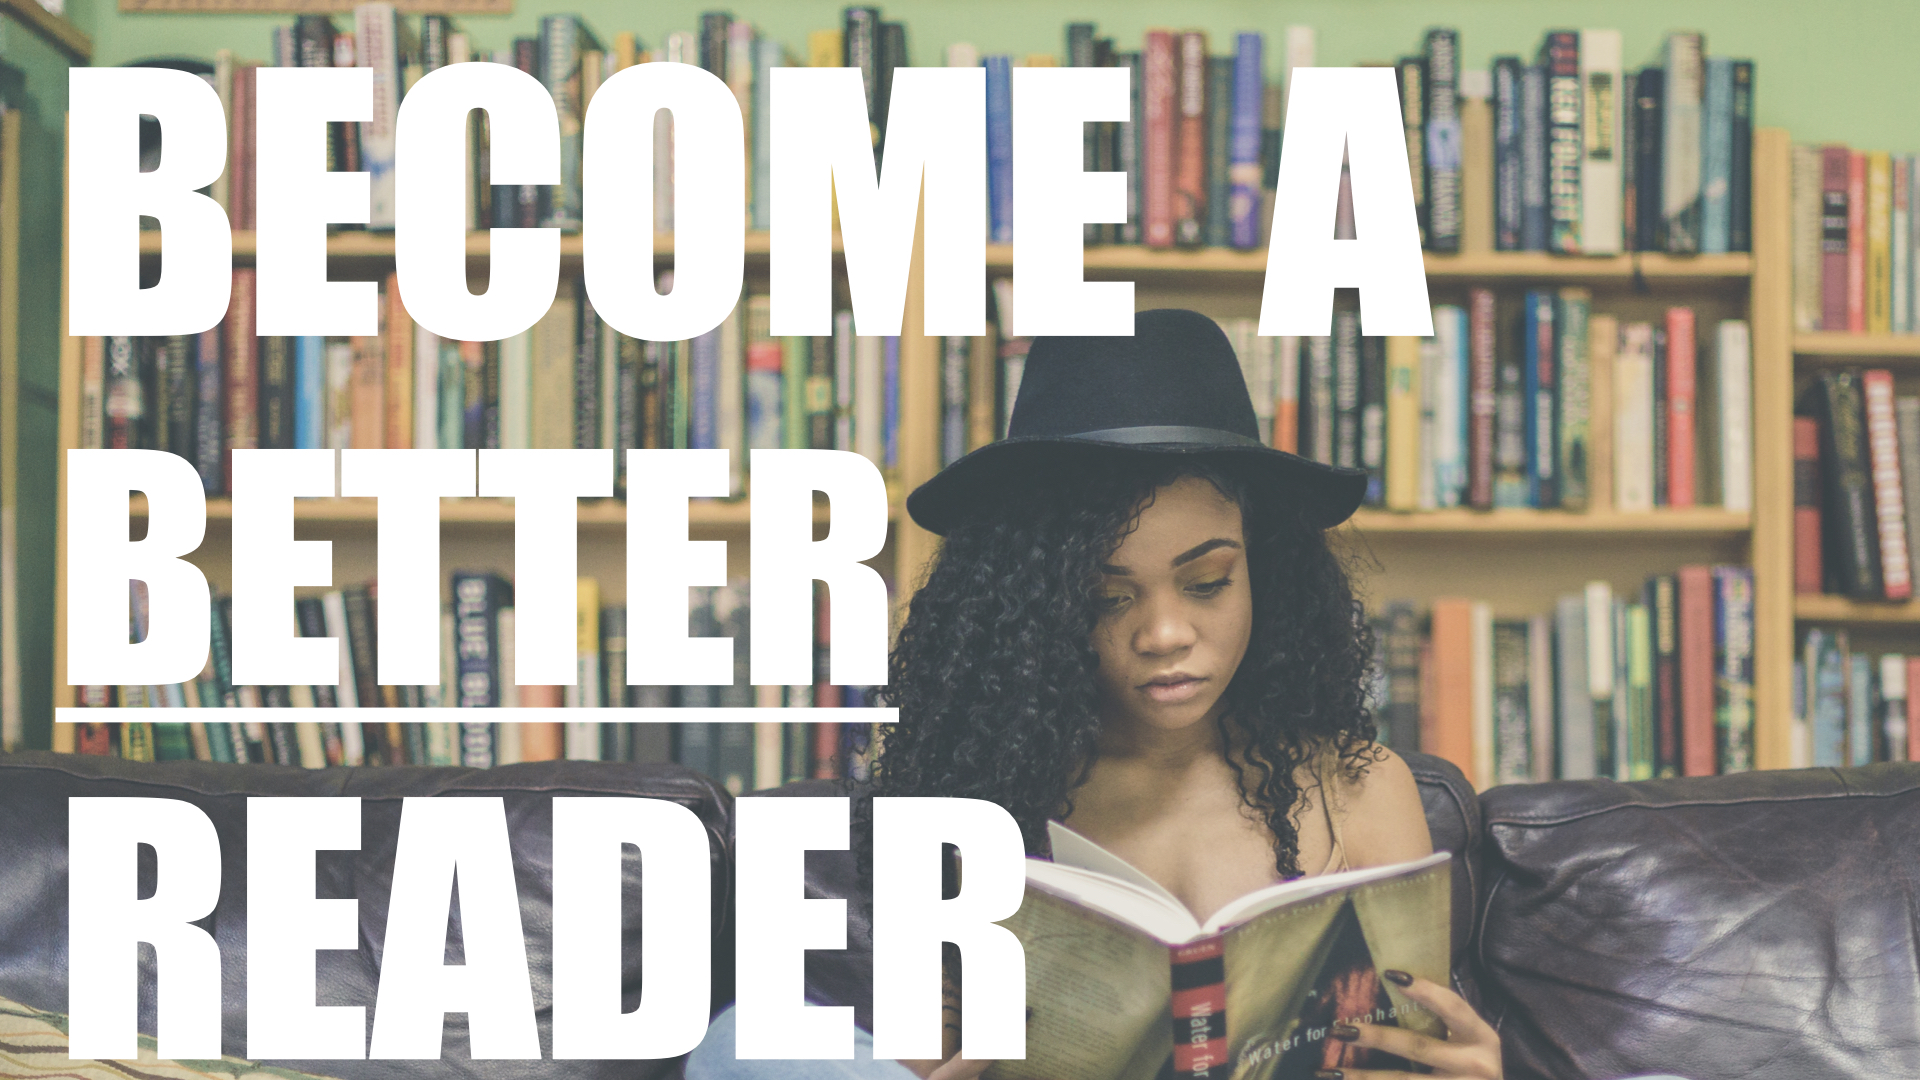 5 Methods to become a better reader